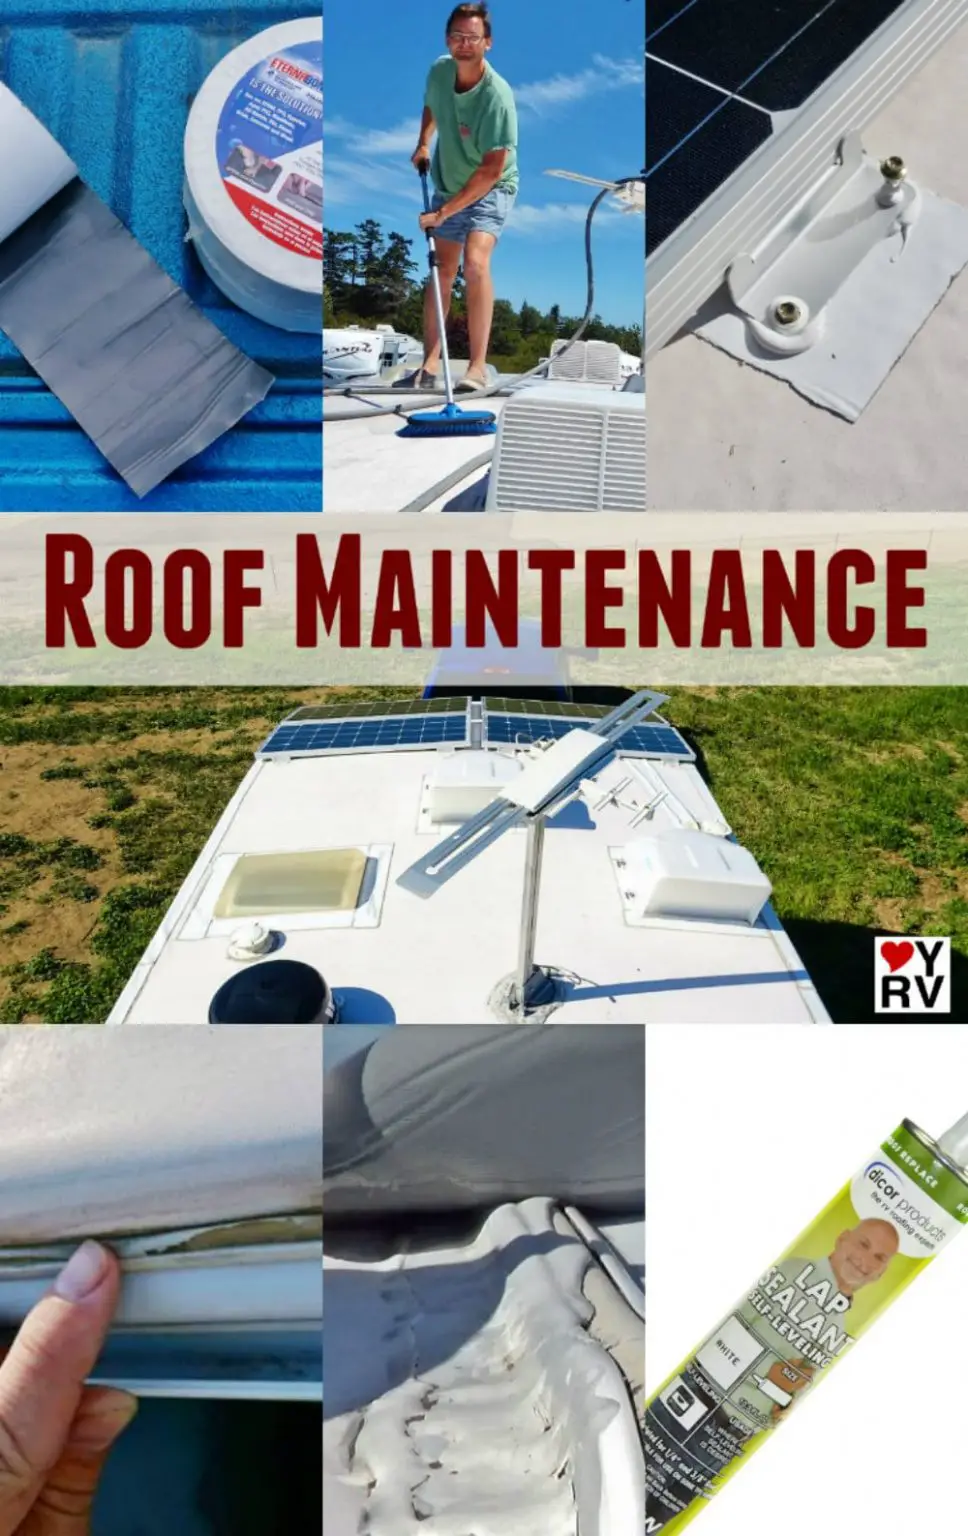 Routine RV Roof Maintenance (Inspection and Leak Protection)